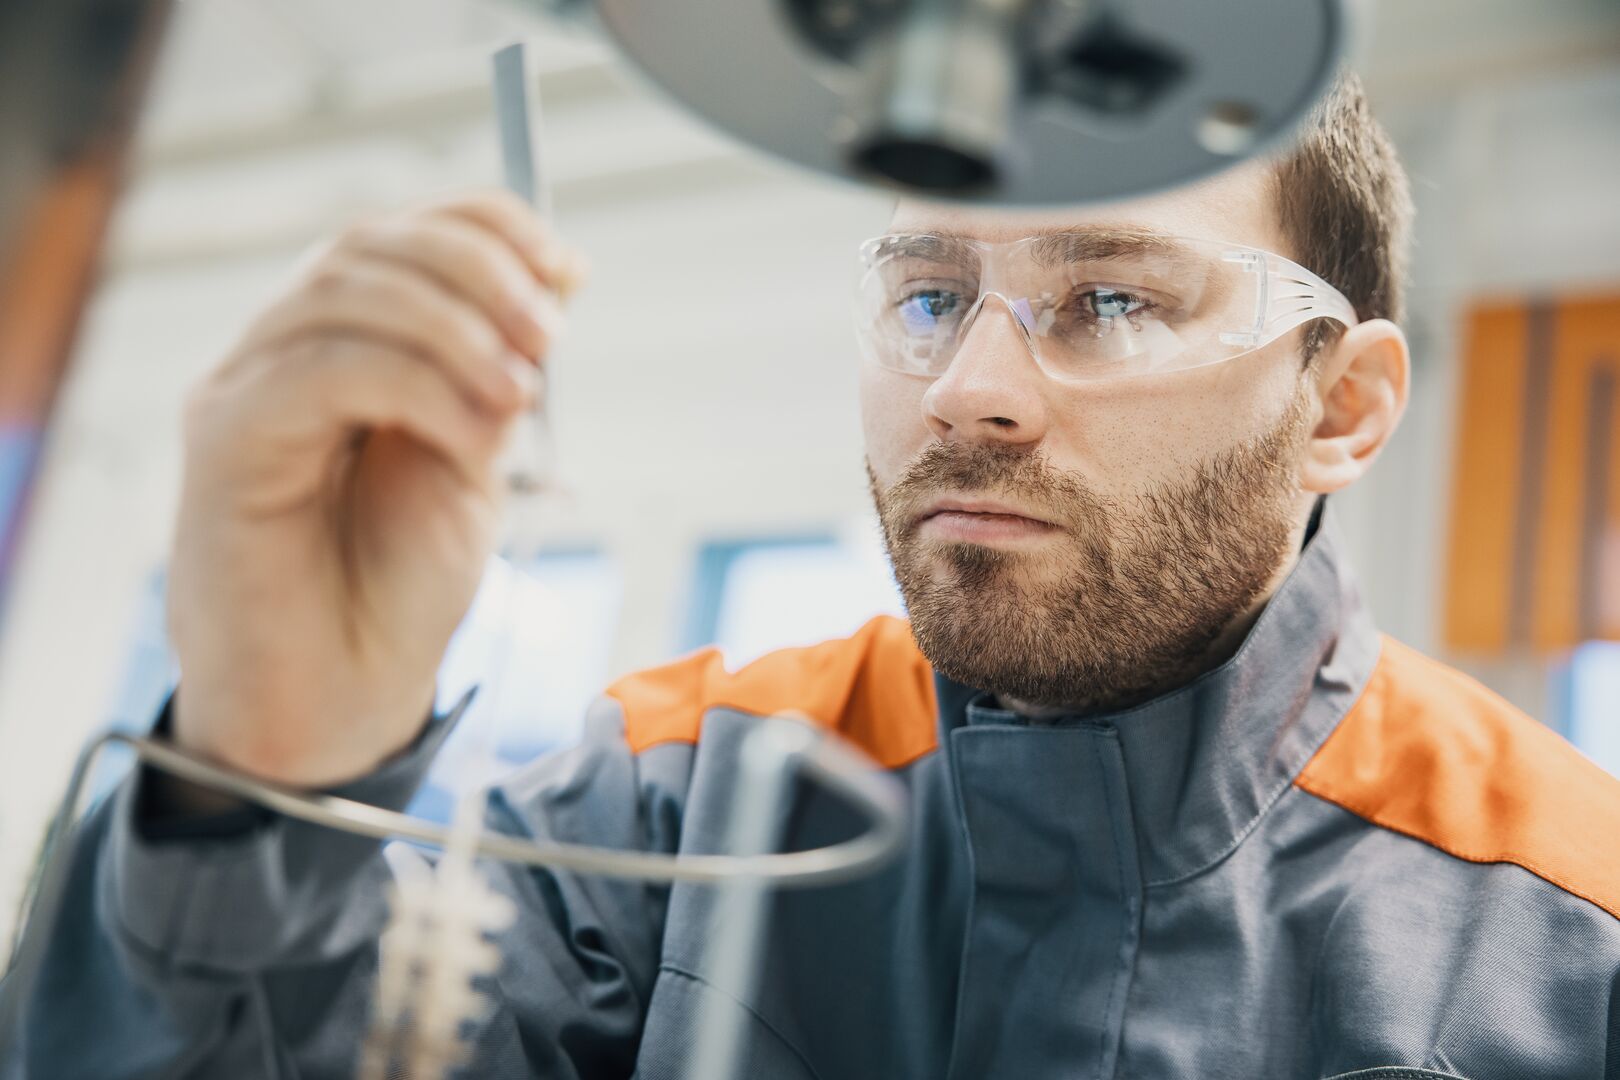 A man wearing safety goggles studying a pippet in a laboratory